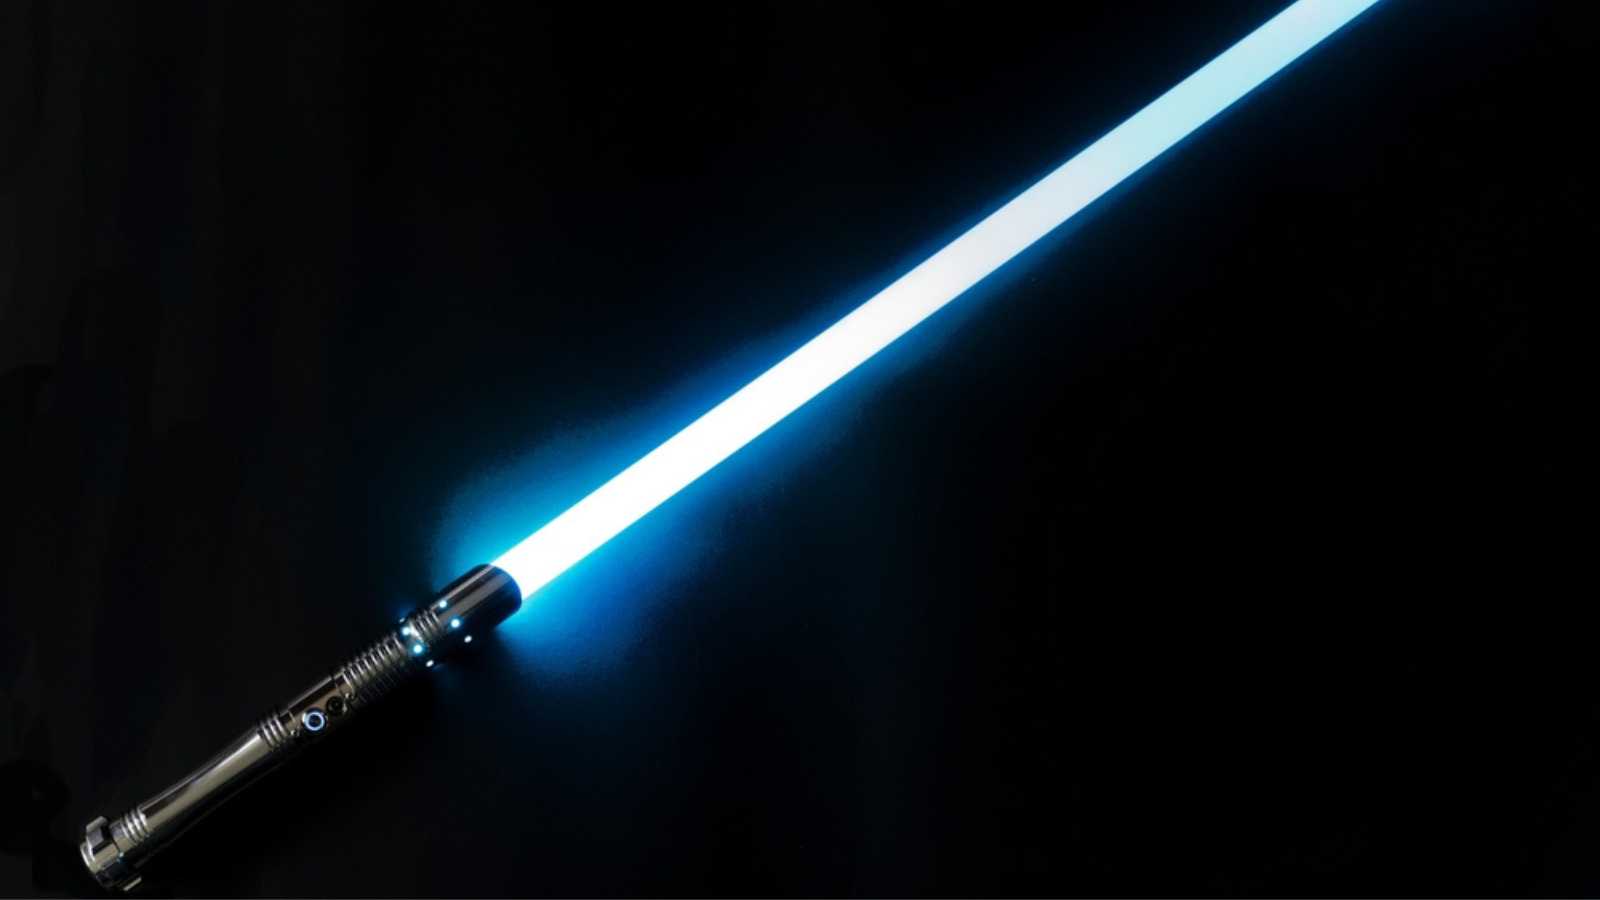 Colorful glowing laser sword blade with shiny silver metal grip against black background. Photo taken January 26th, 2023, Zurich, Switzerland.